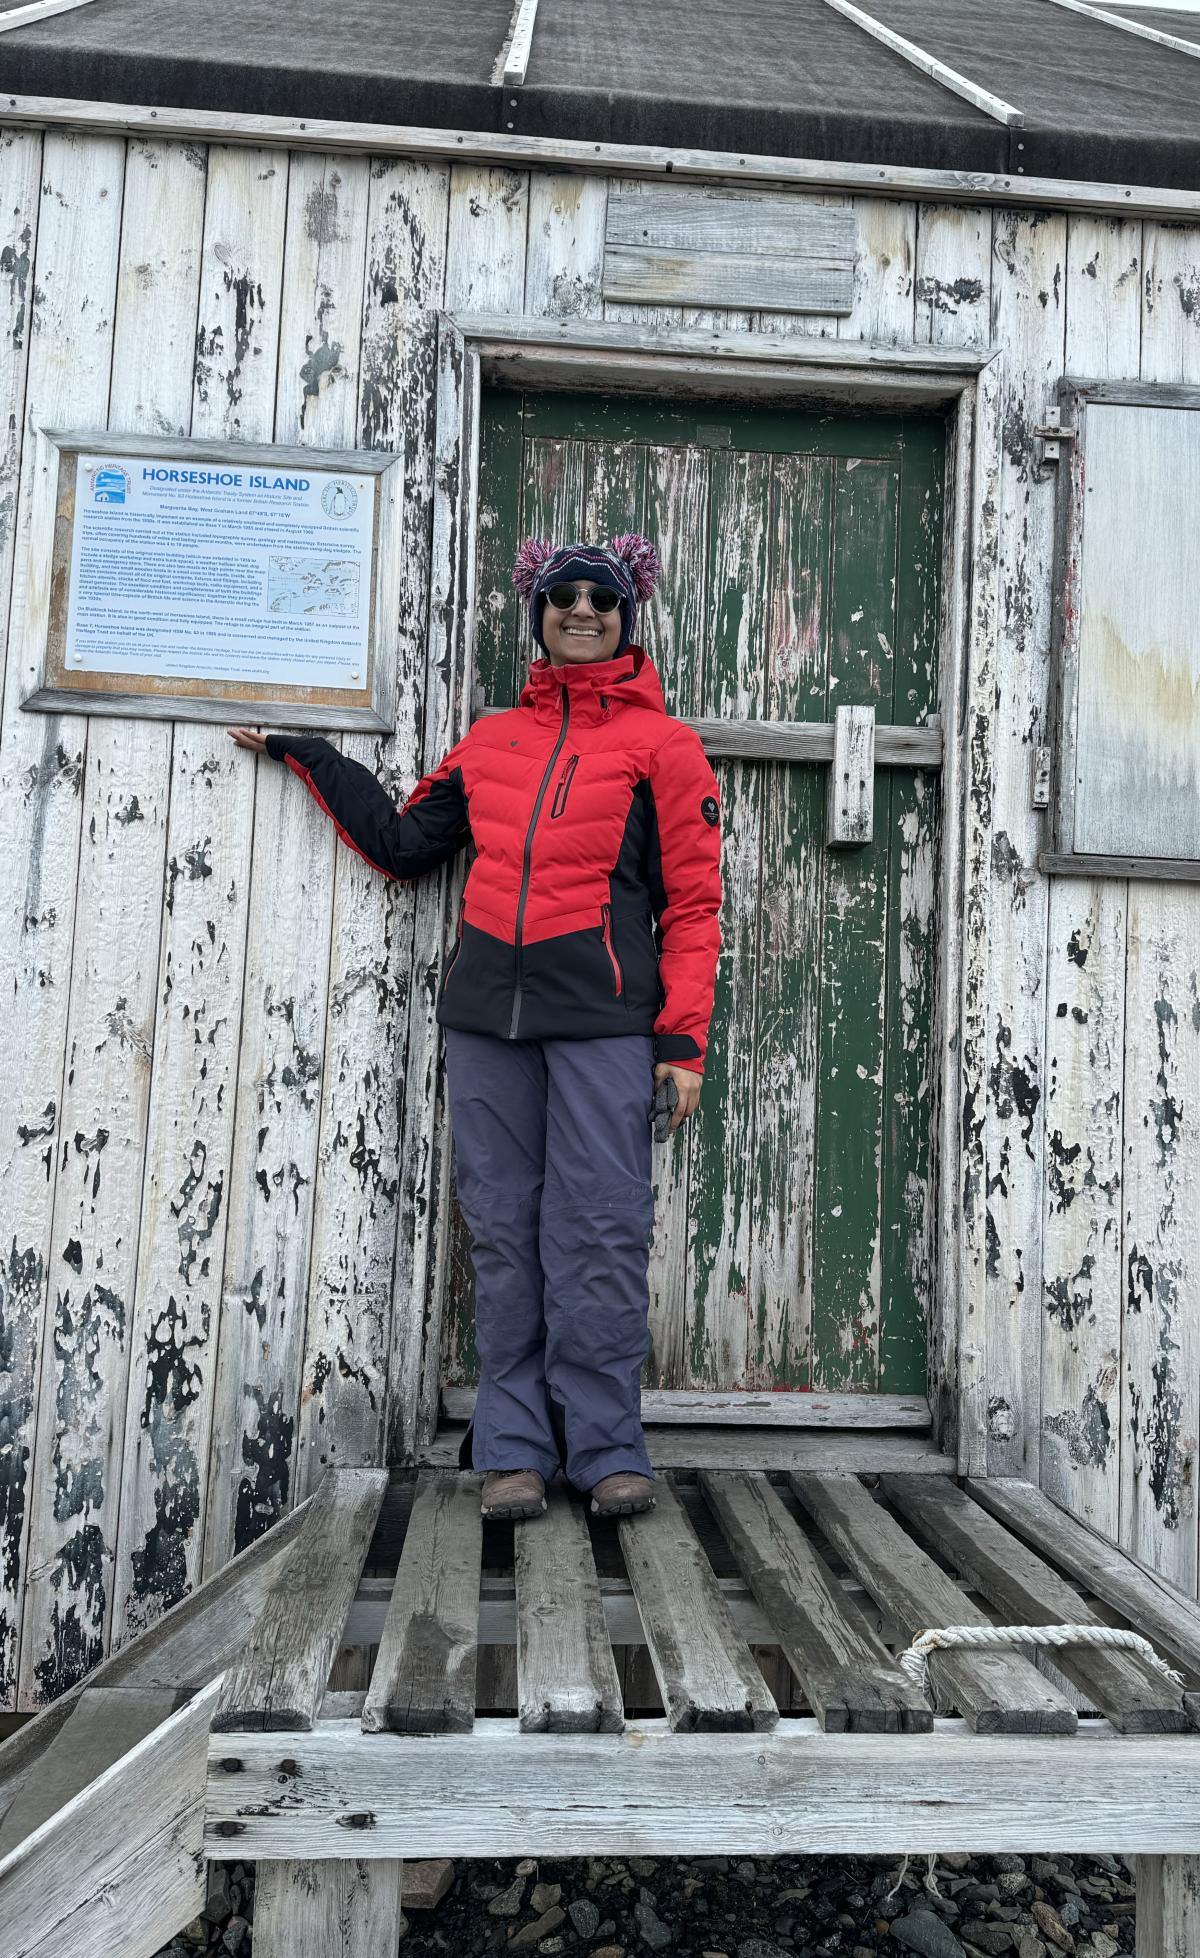 Shweta in front of original main building of an inactive British research base on the Horseshoe Island.